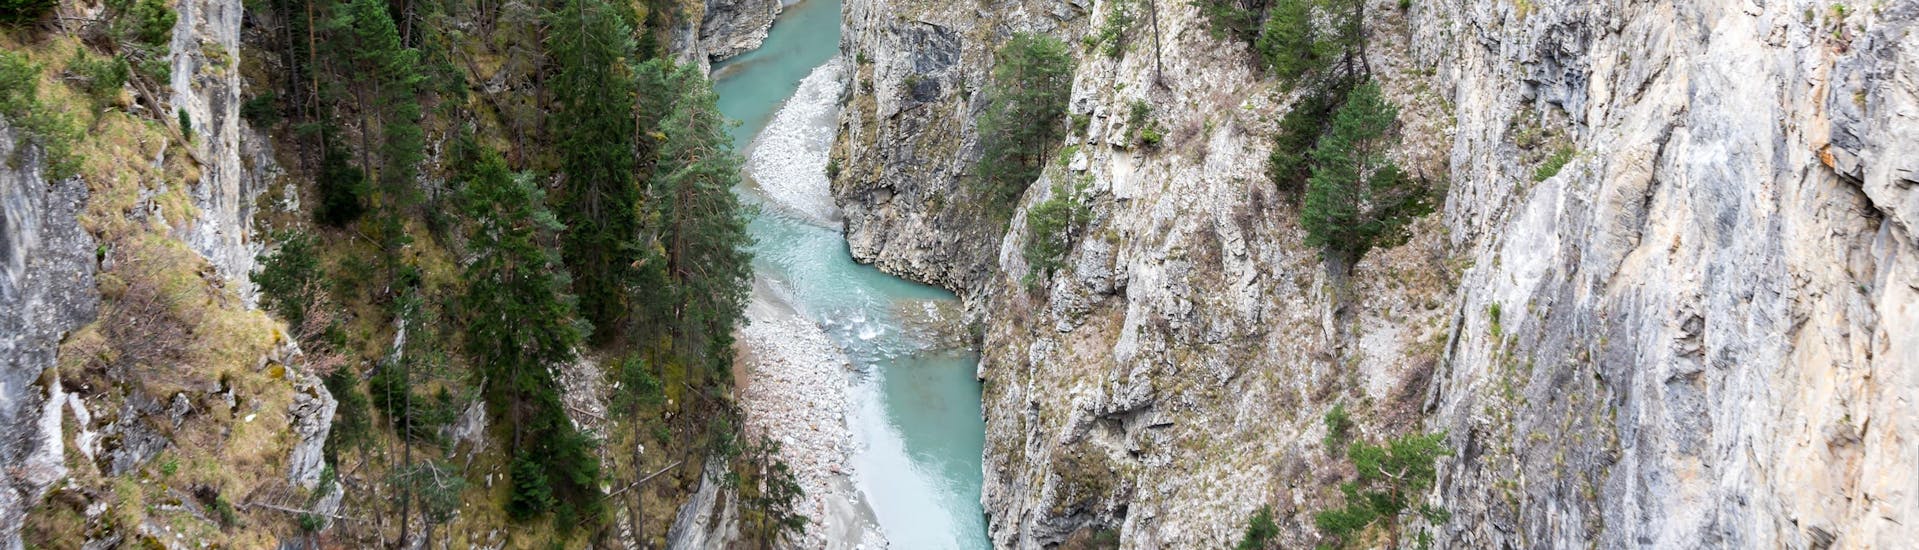 View of a gorge in the Annecy area where you can do canyonin in the Pont du Diable Canyon.